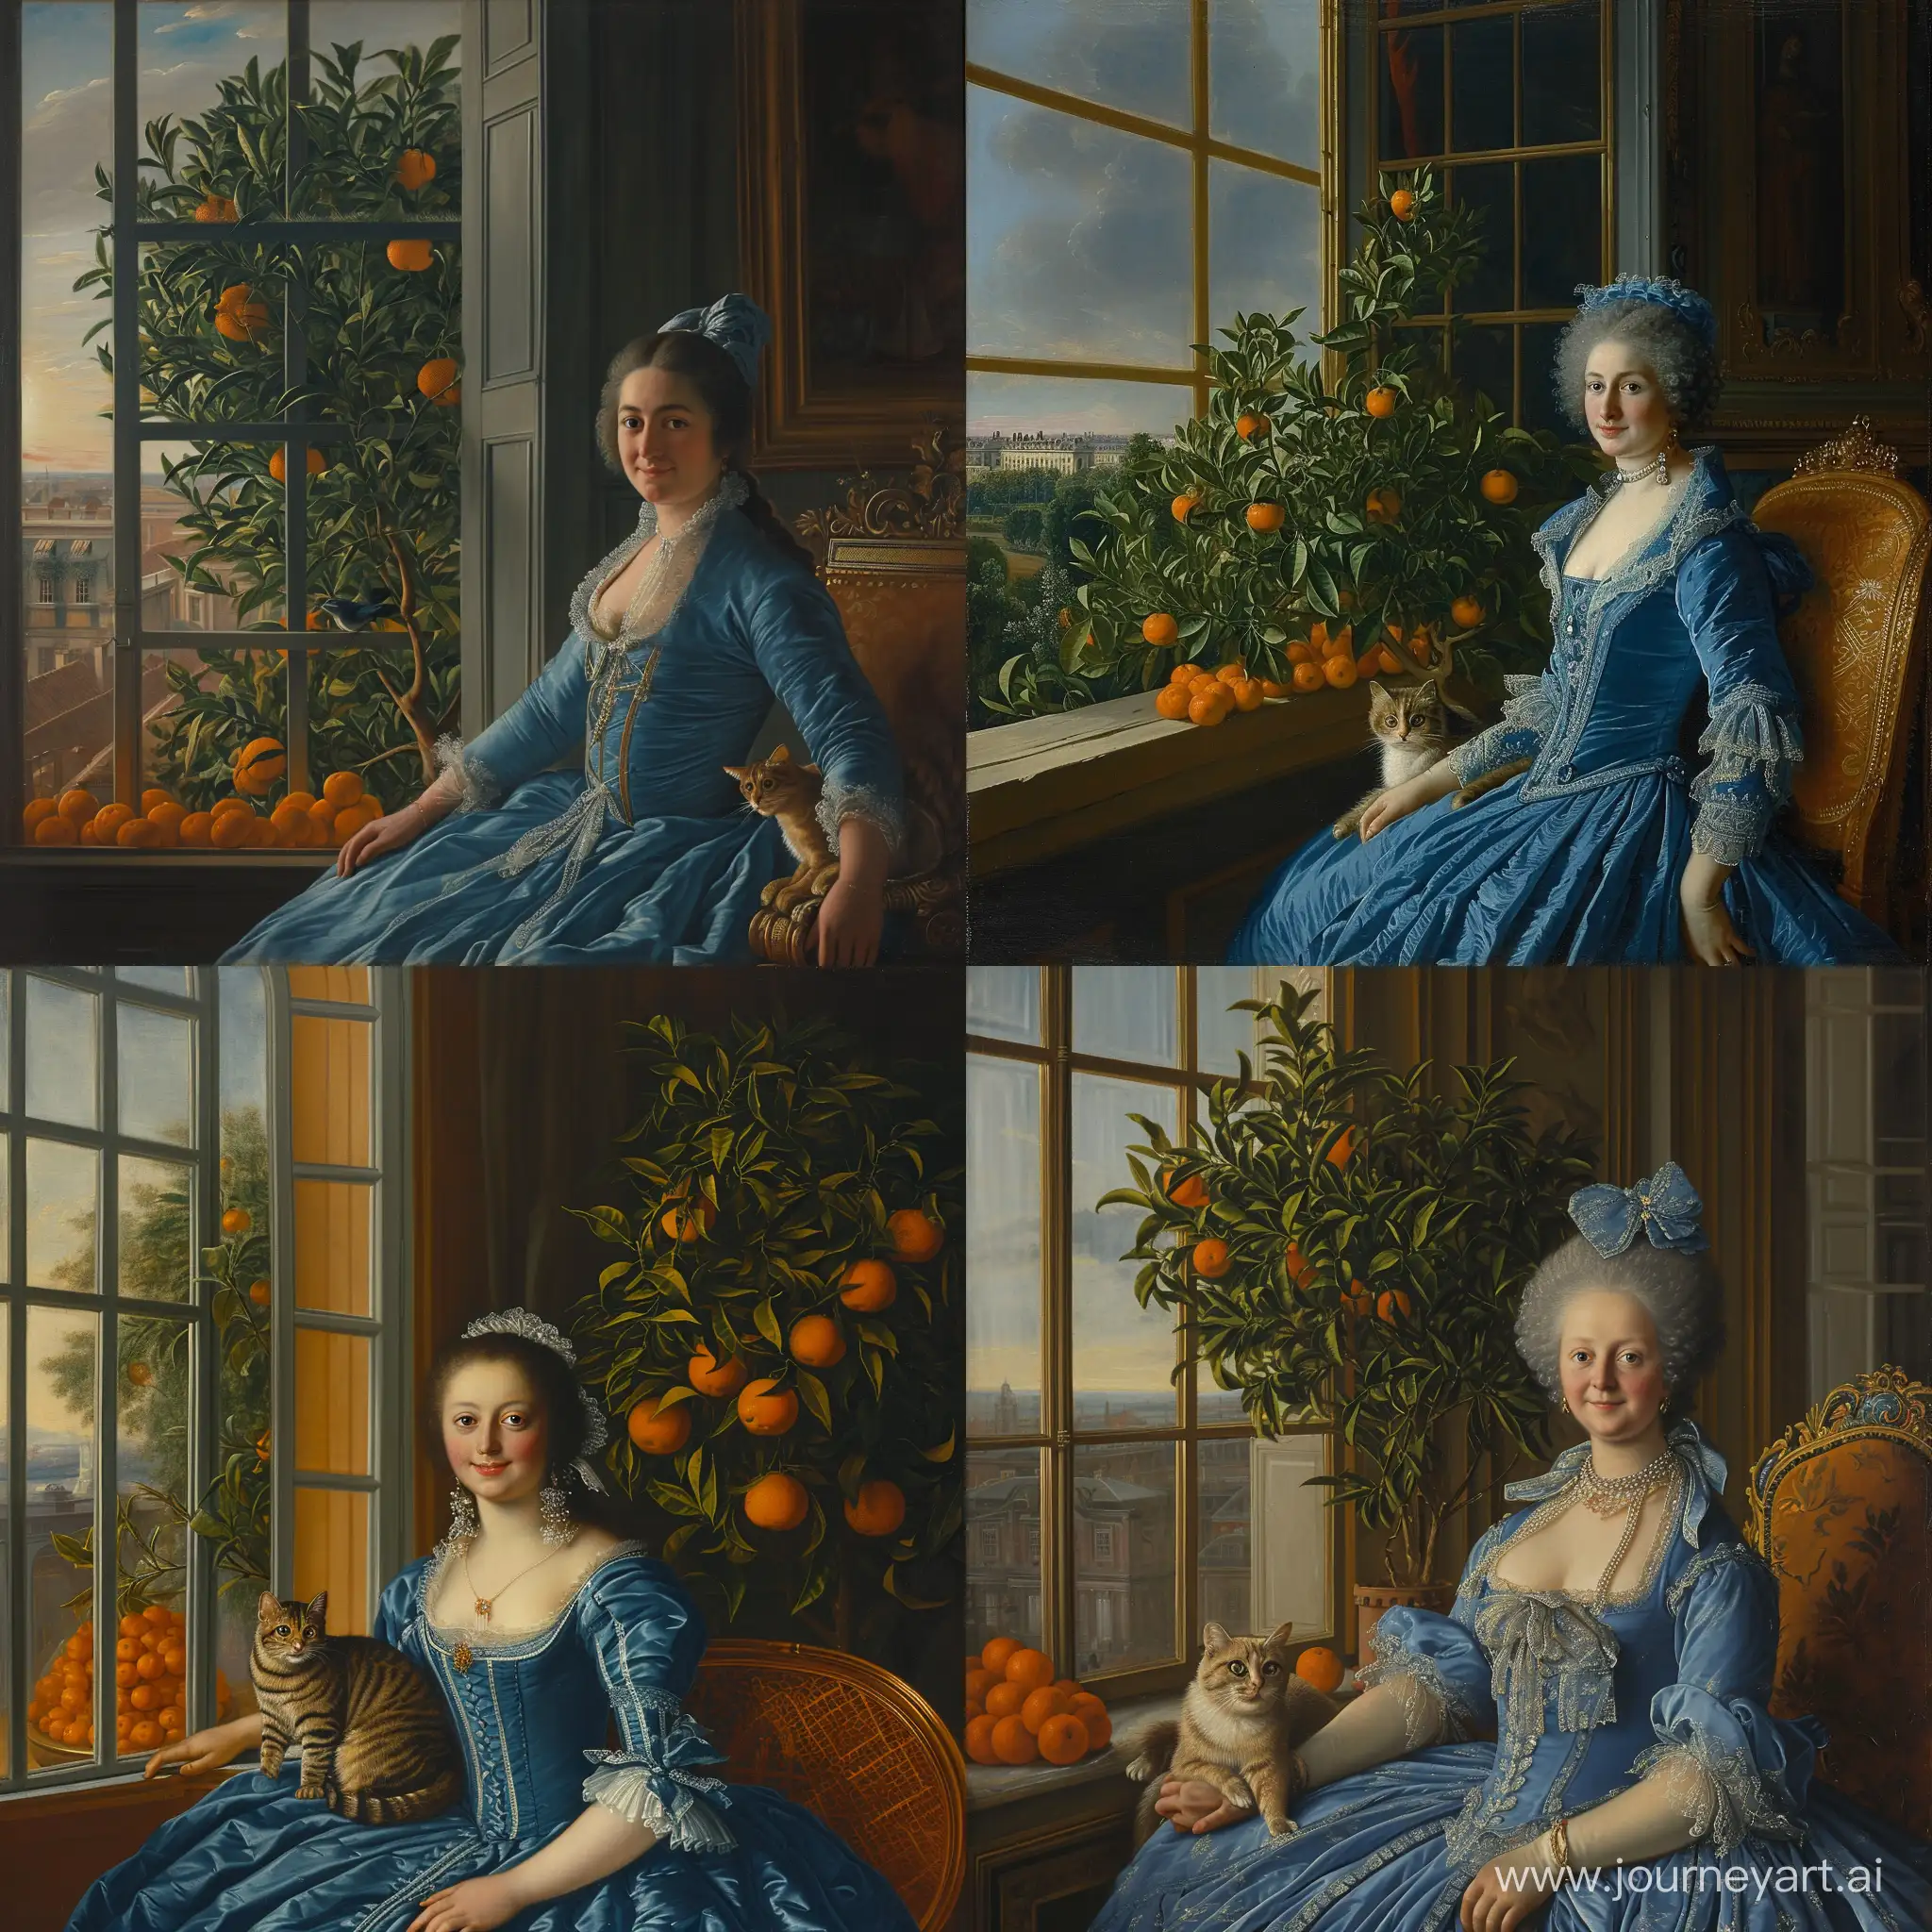 Spanish-Lady-in-Blue-Fashionable-1775-Dress-Elegant-Portrait-with-Cat-and-Oranges